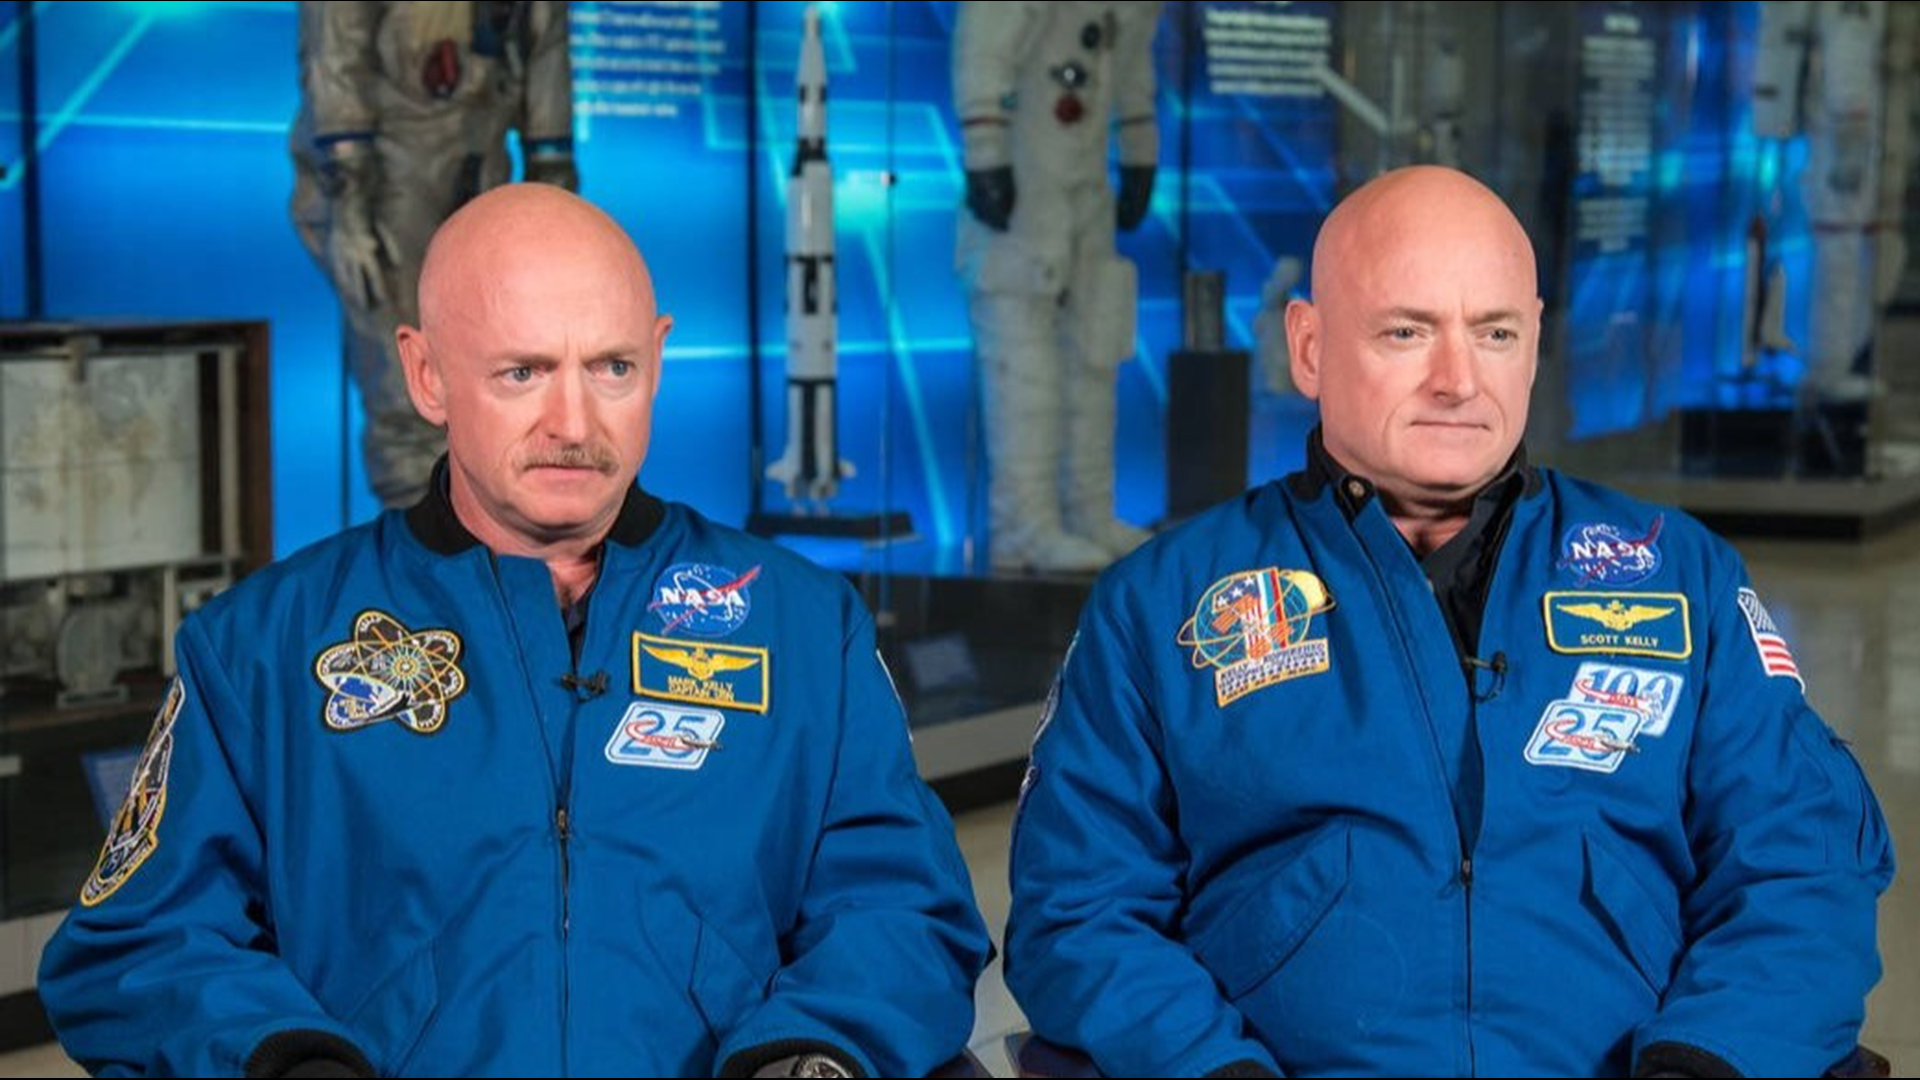 The way Scott Kelly's DNA behaved changed, but the results are still pretty groundbreaking.